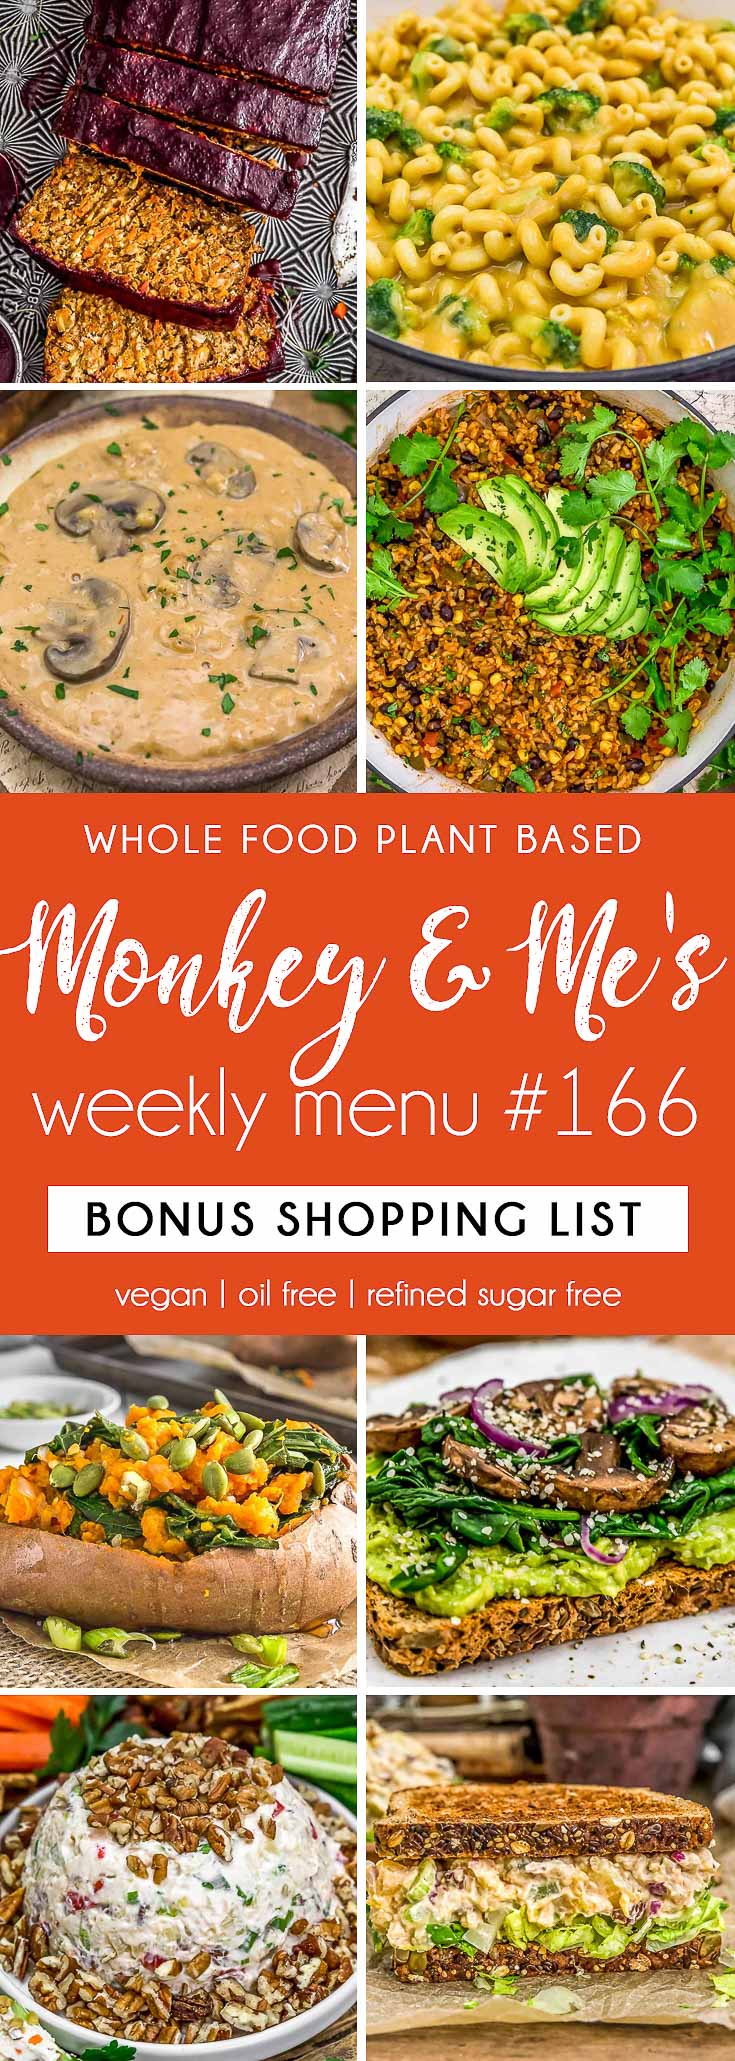 Monkey and Me's Menu 165 featuring 8 recipes